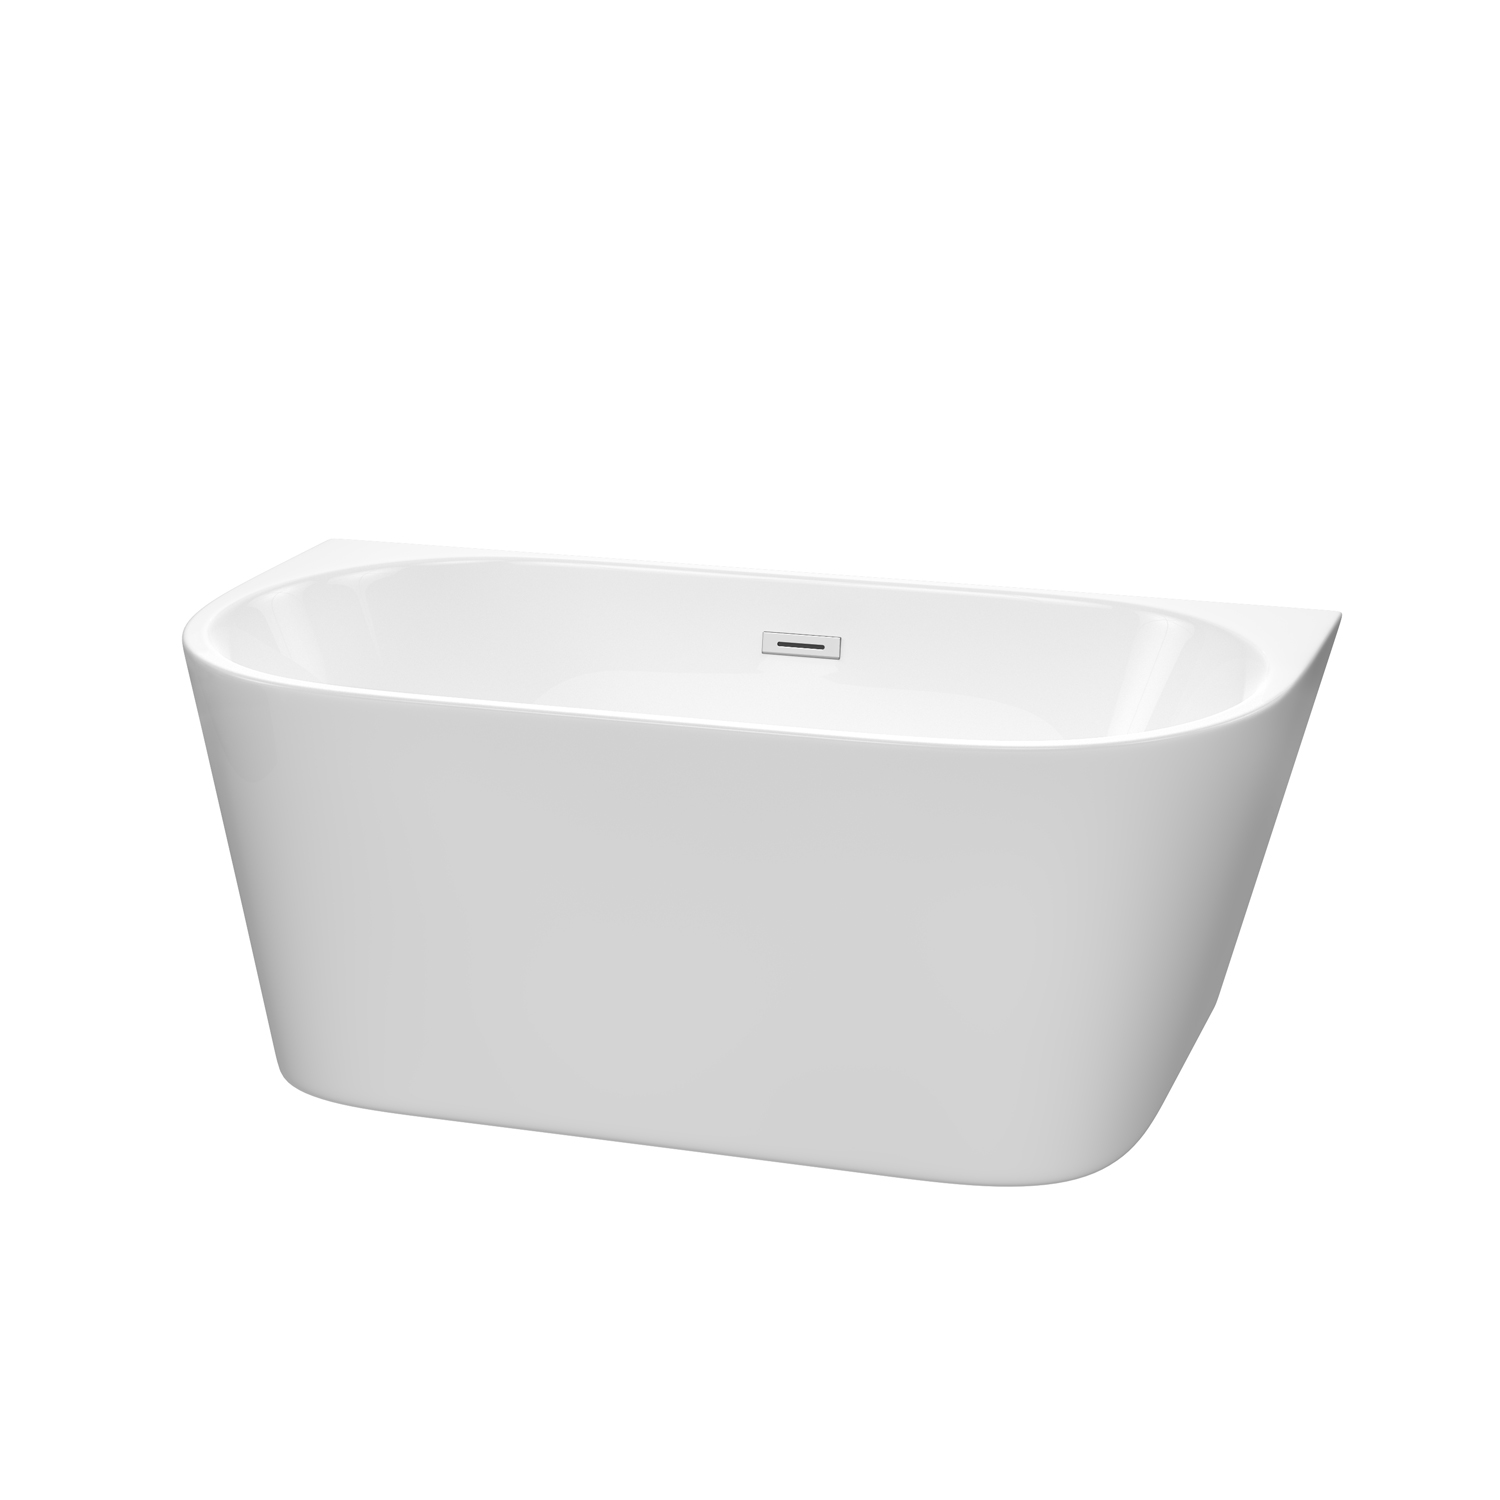 59" Freestanding Bathtub in White with Polished Chrome Drain and Overflow Trim with Hardware and Faucet Options